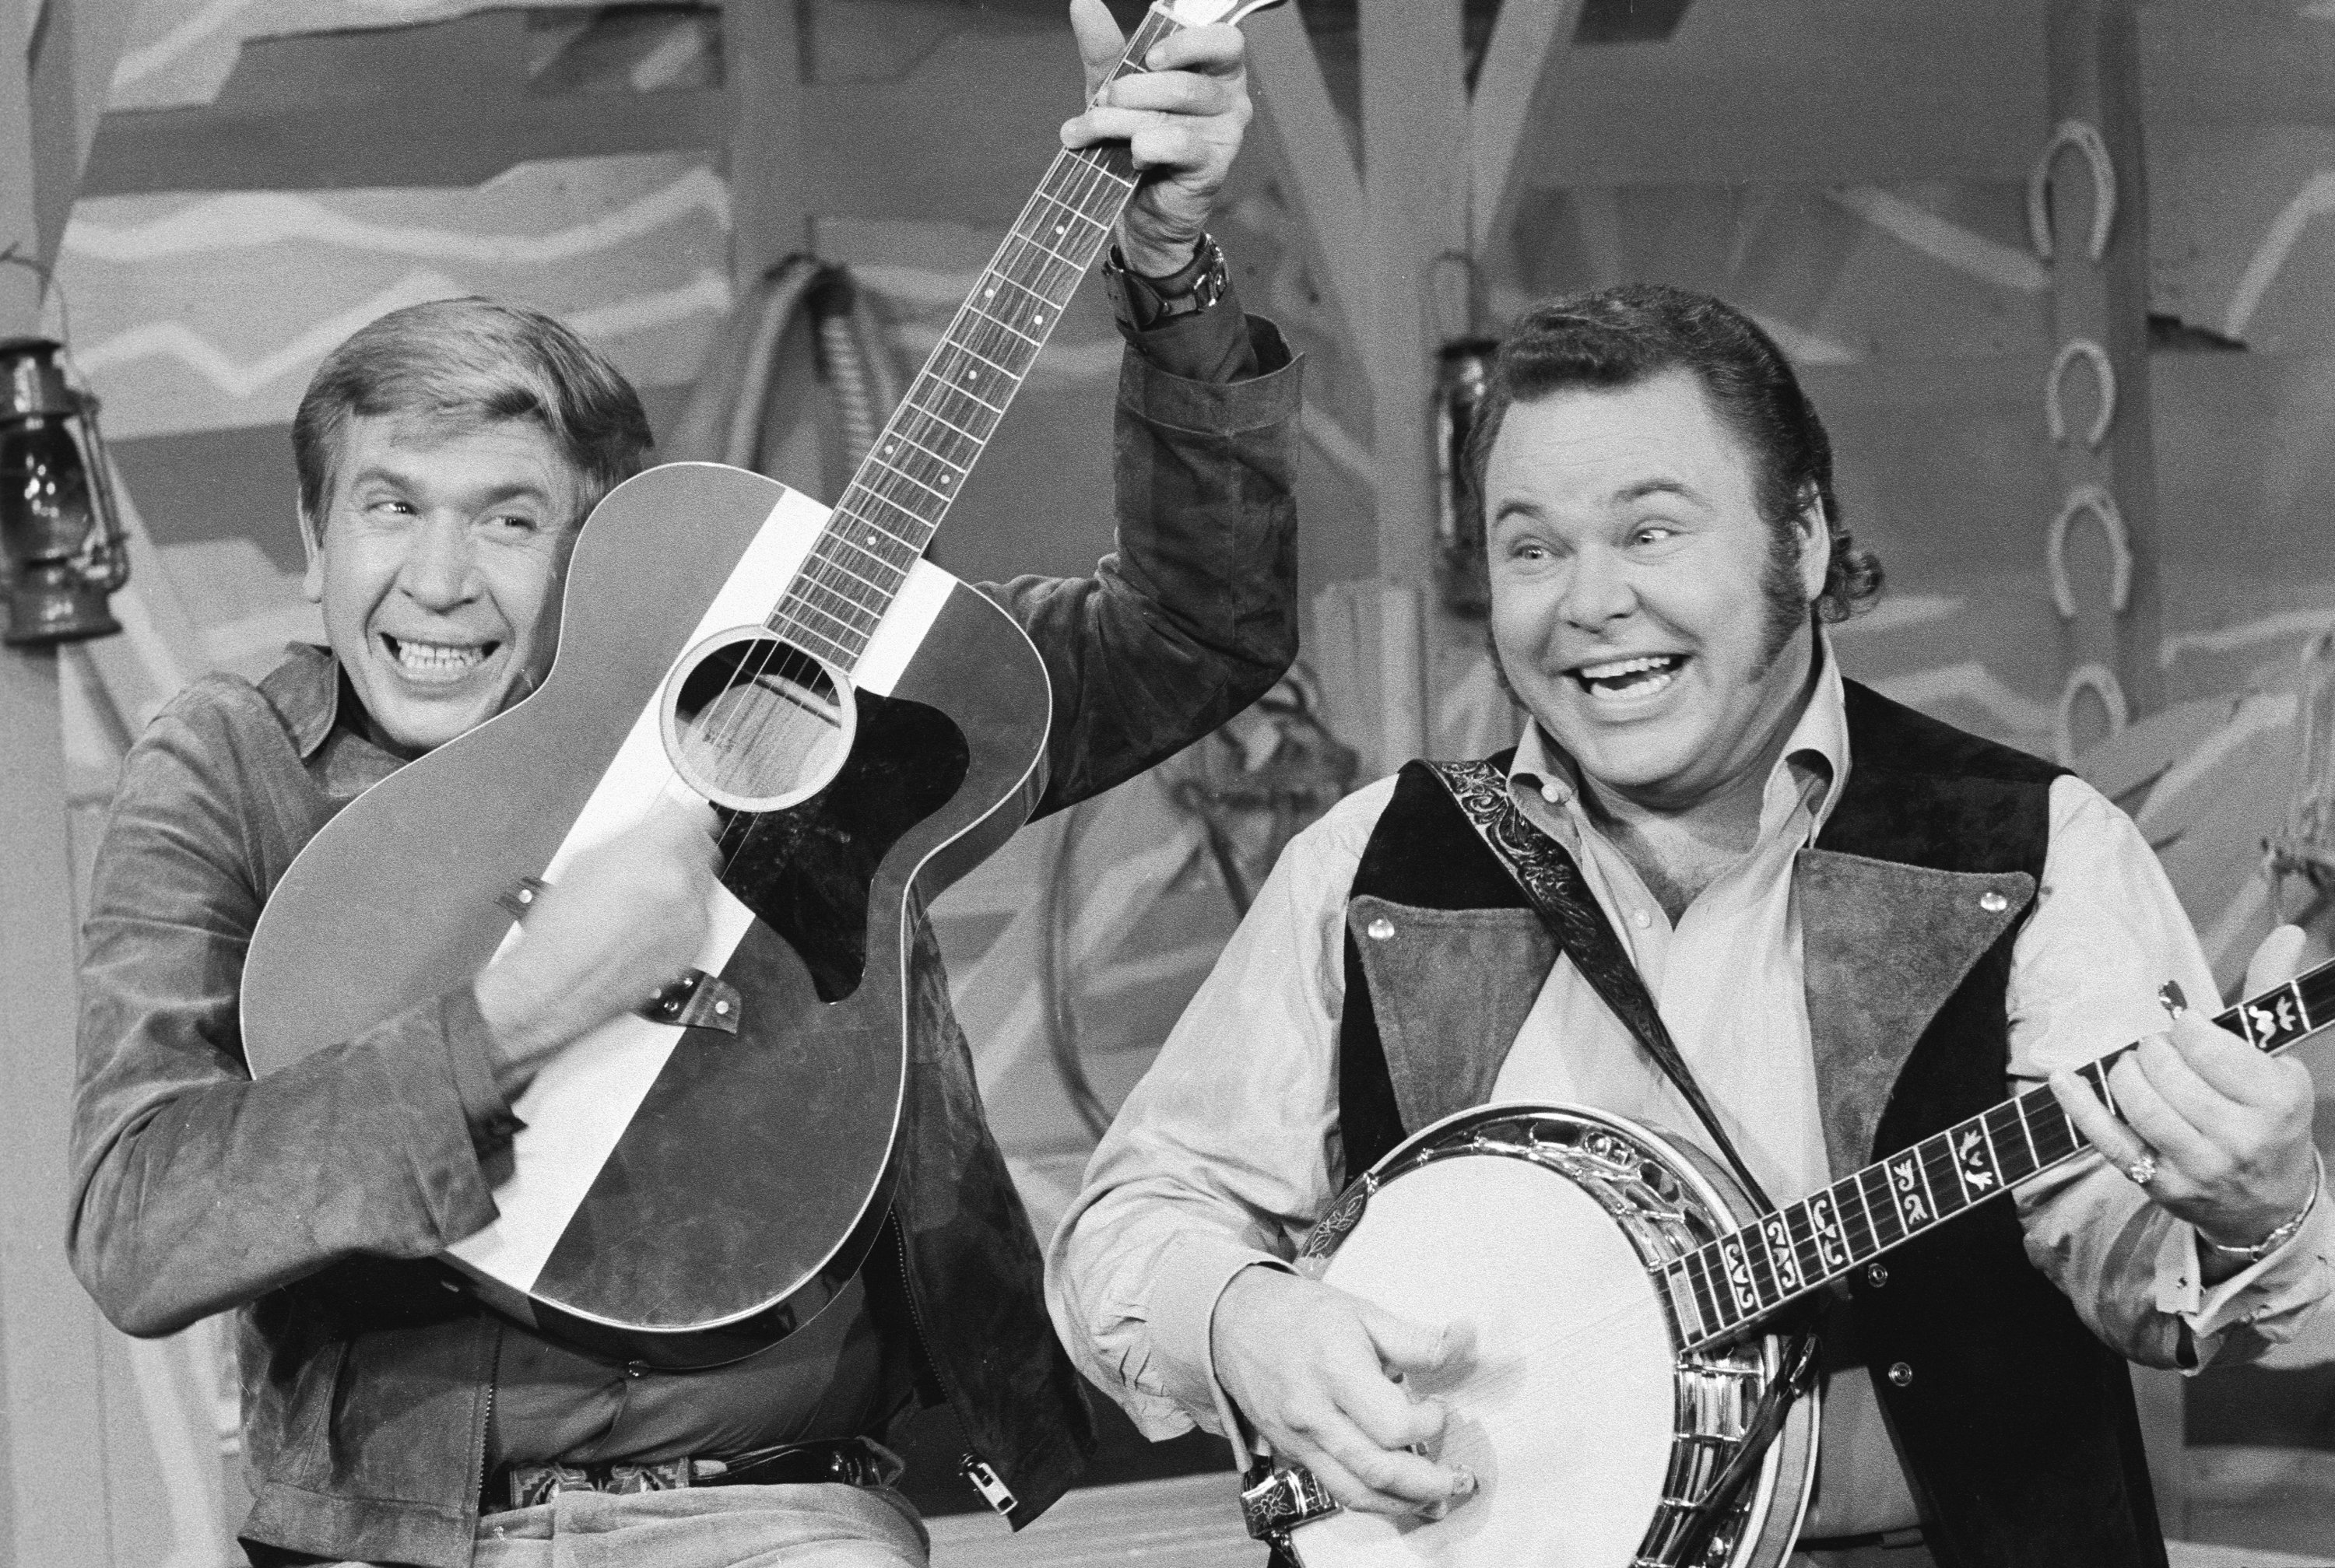 Buck Owens on the left and Roy Clark on the right on "Hee Haw" in 1970 | Photo: CBS via Getty Images